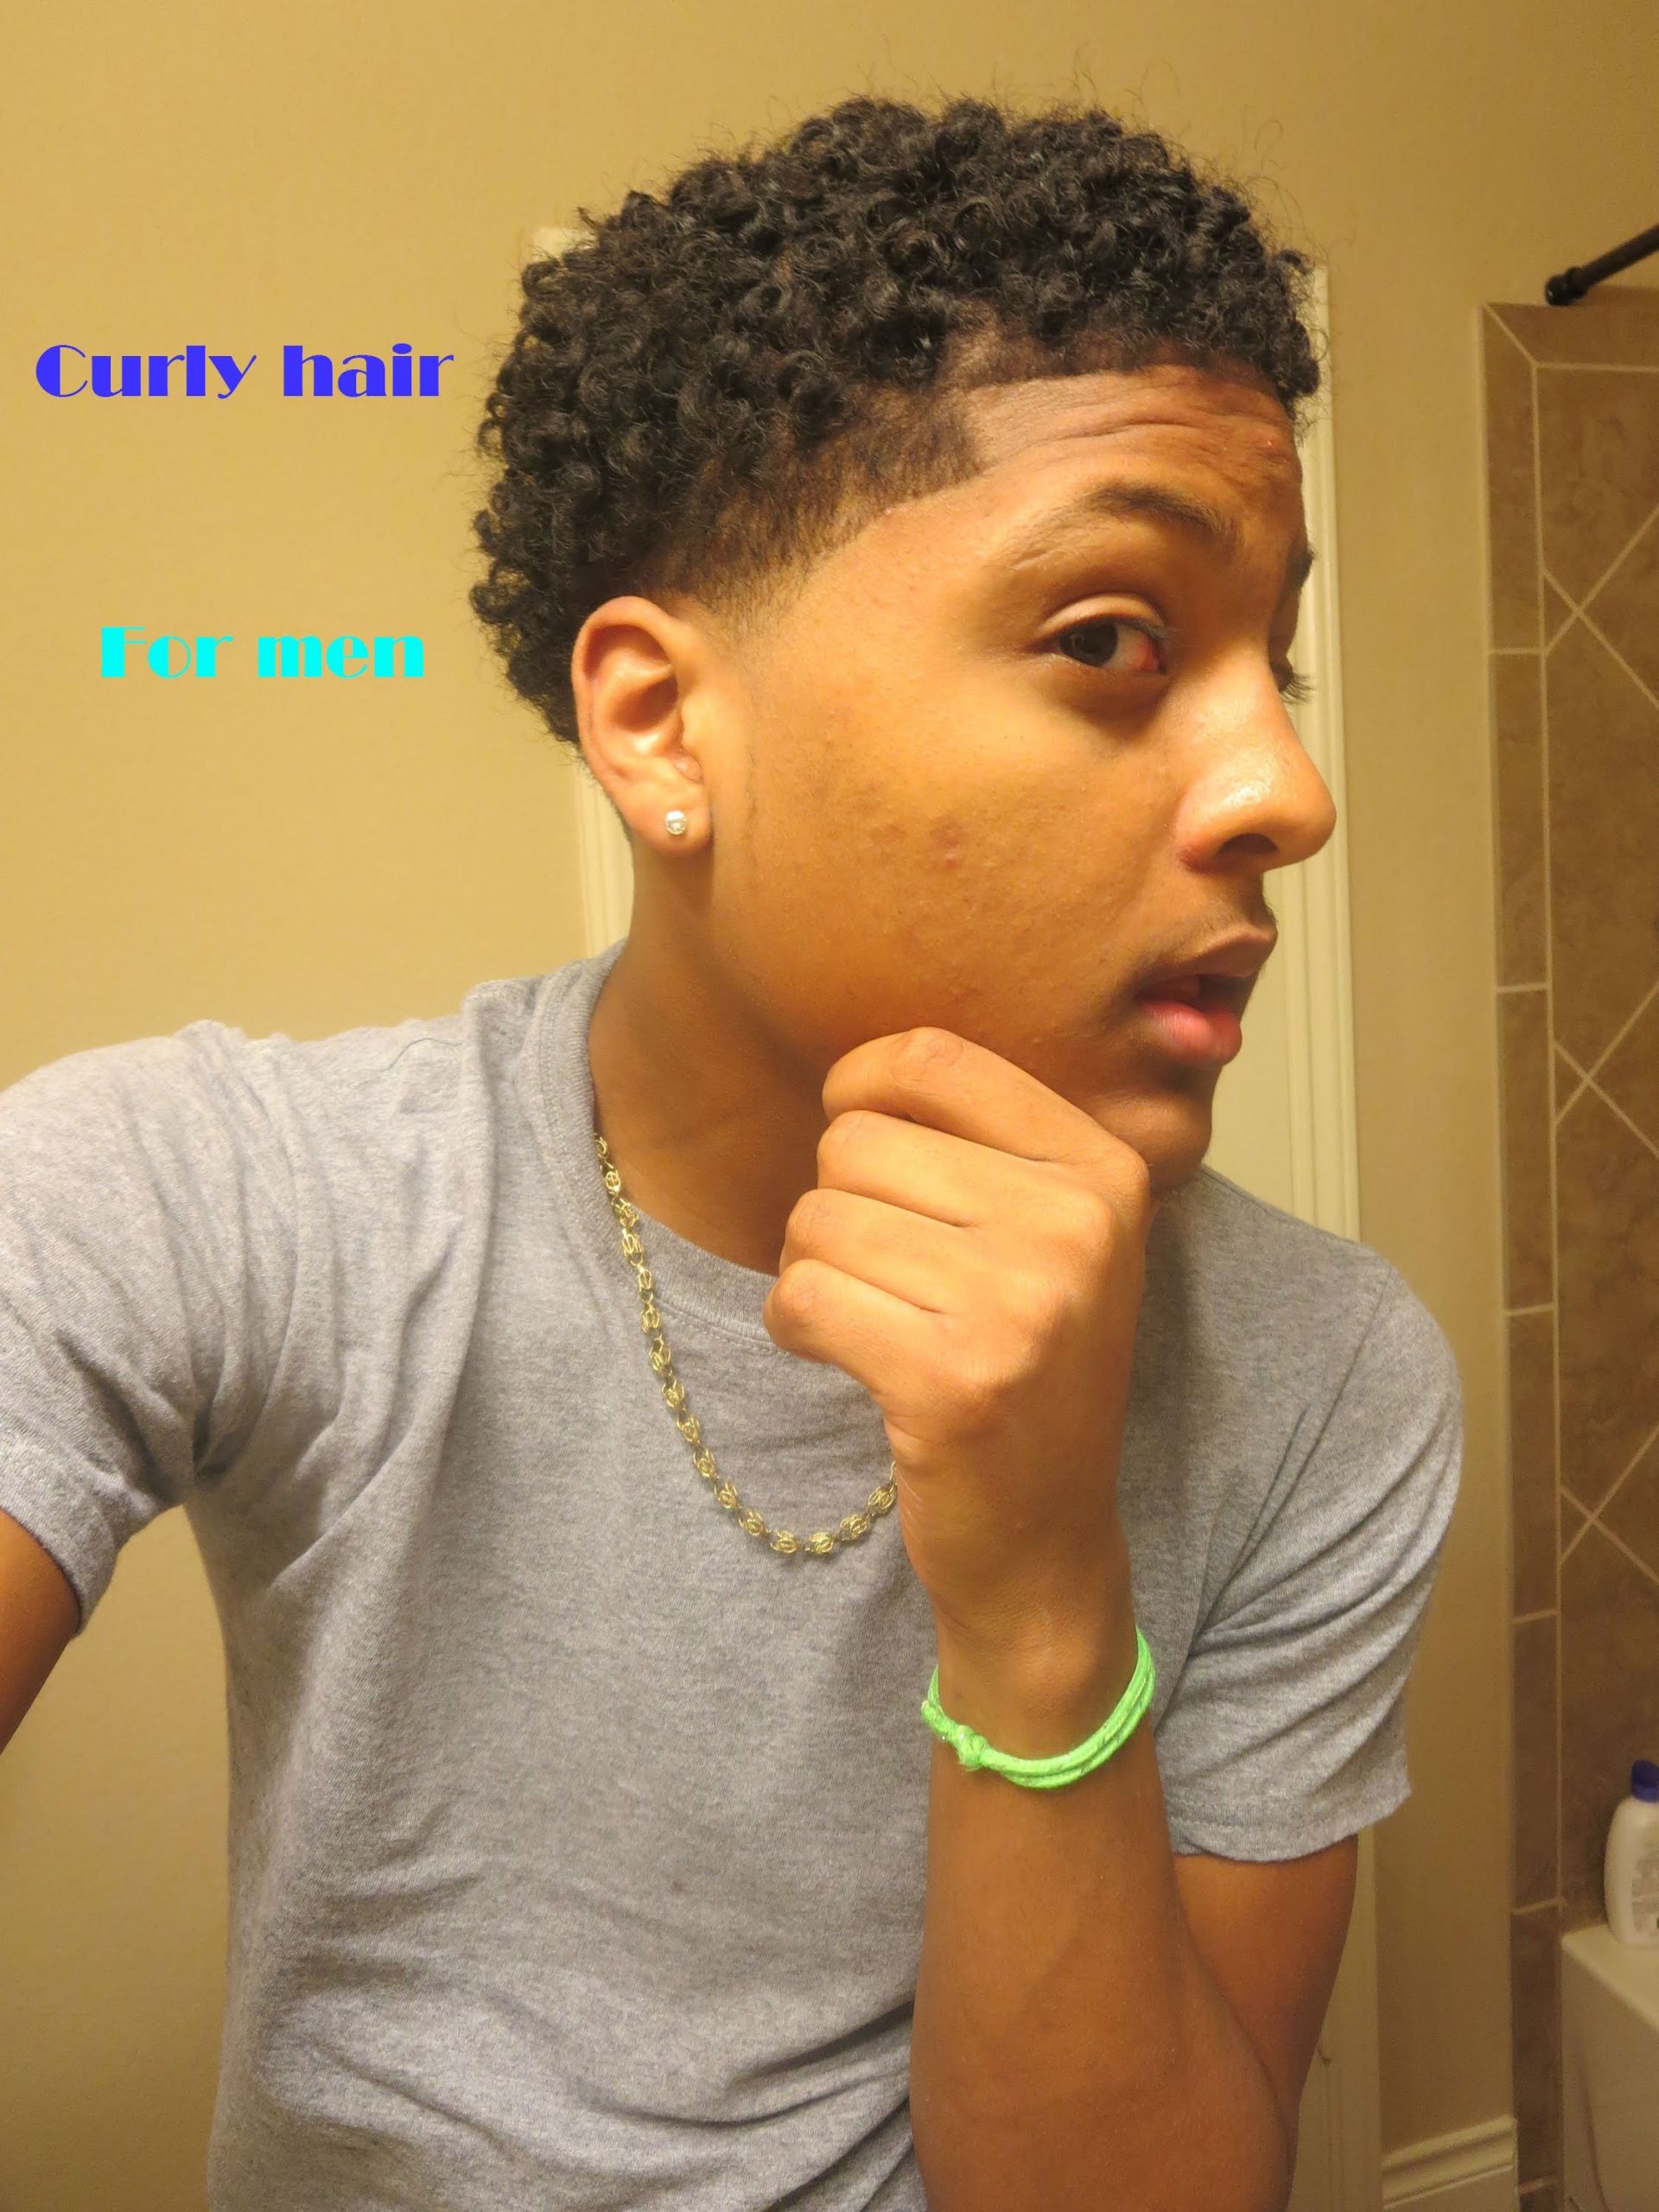 Curly Hairstyles For Black Males
 Medium Curly Hairstyles for Black Men